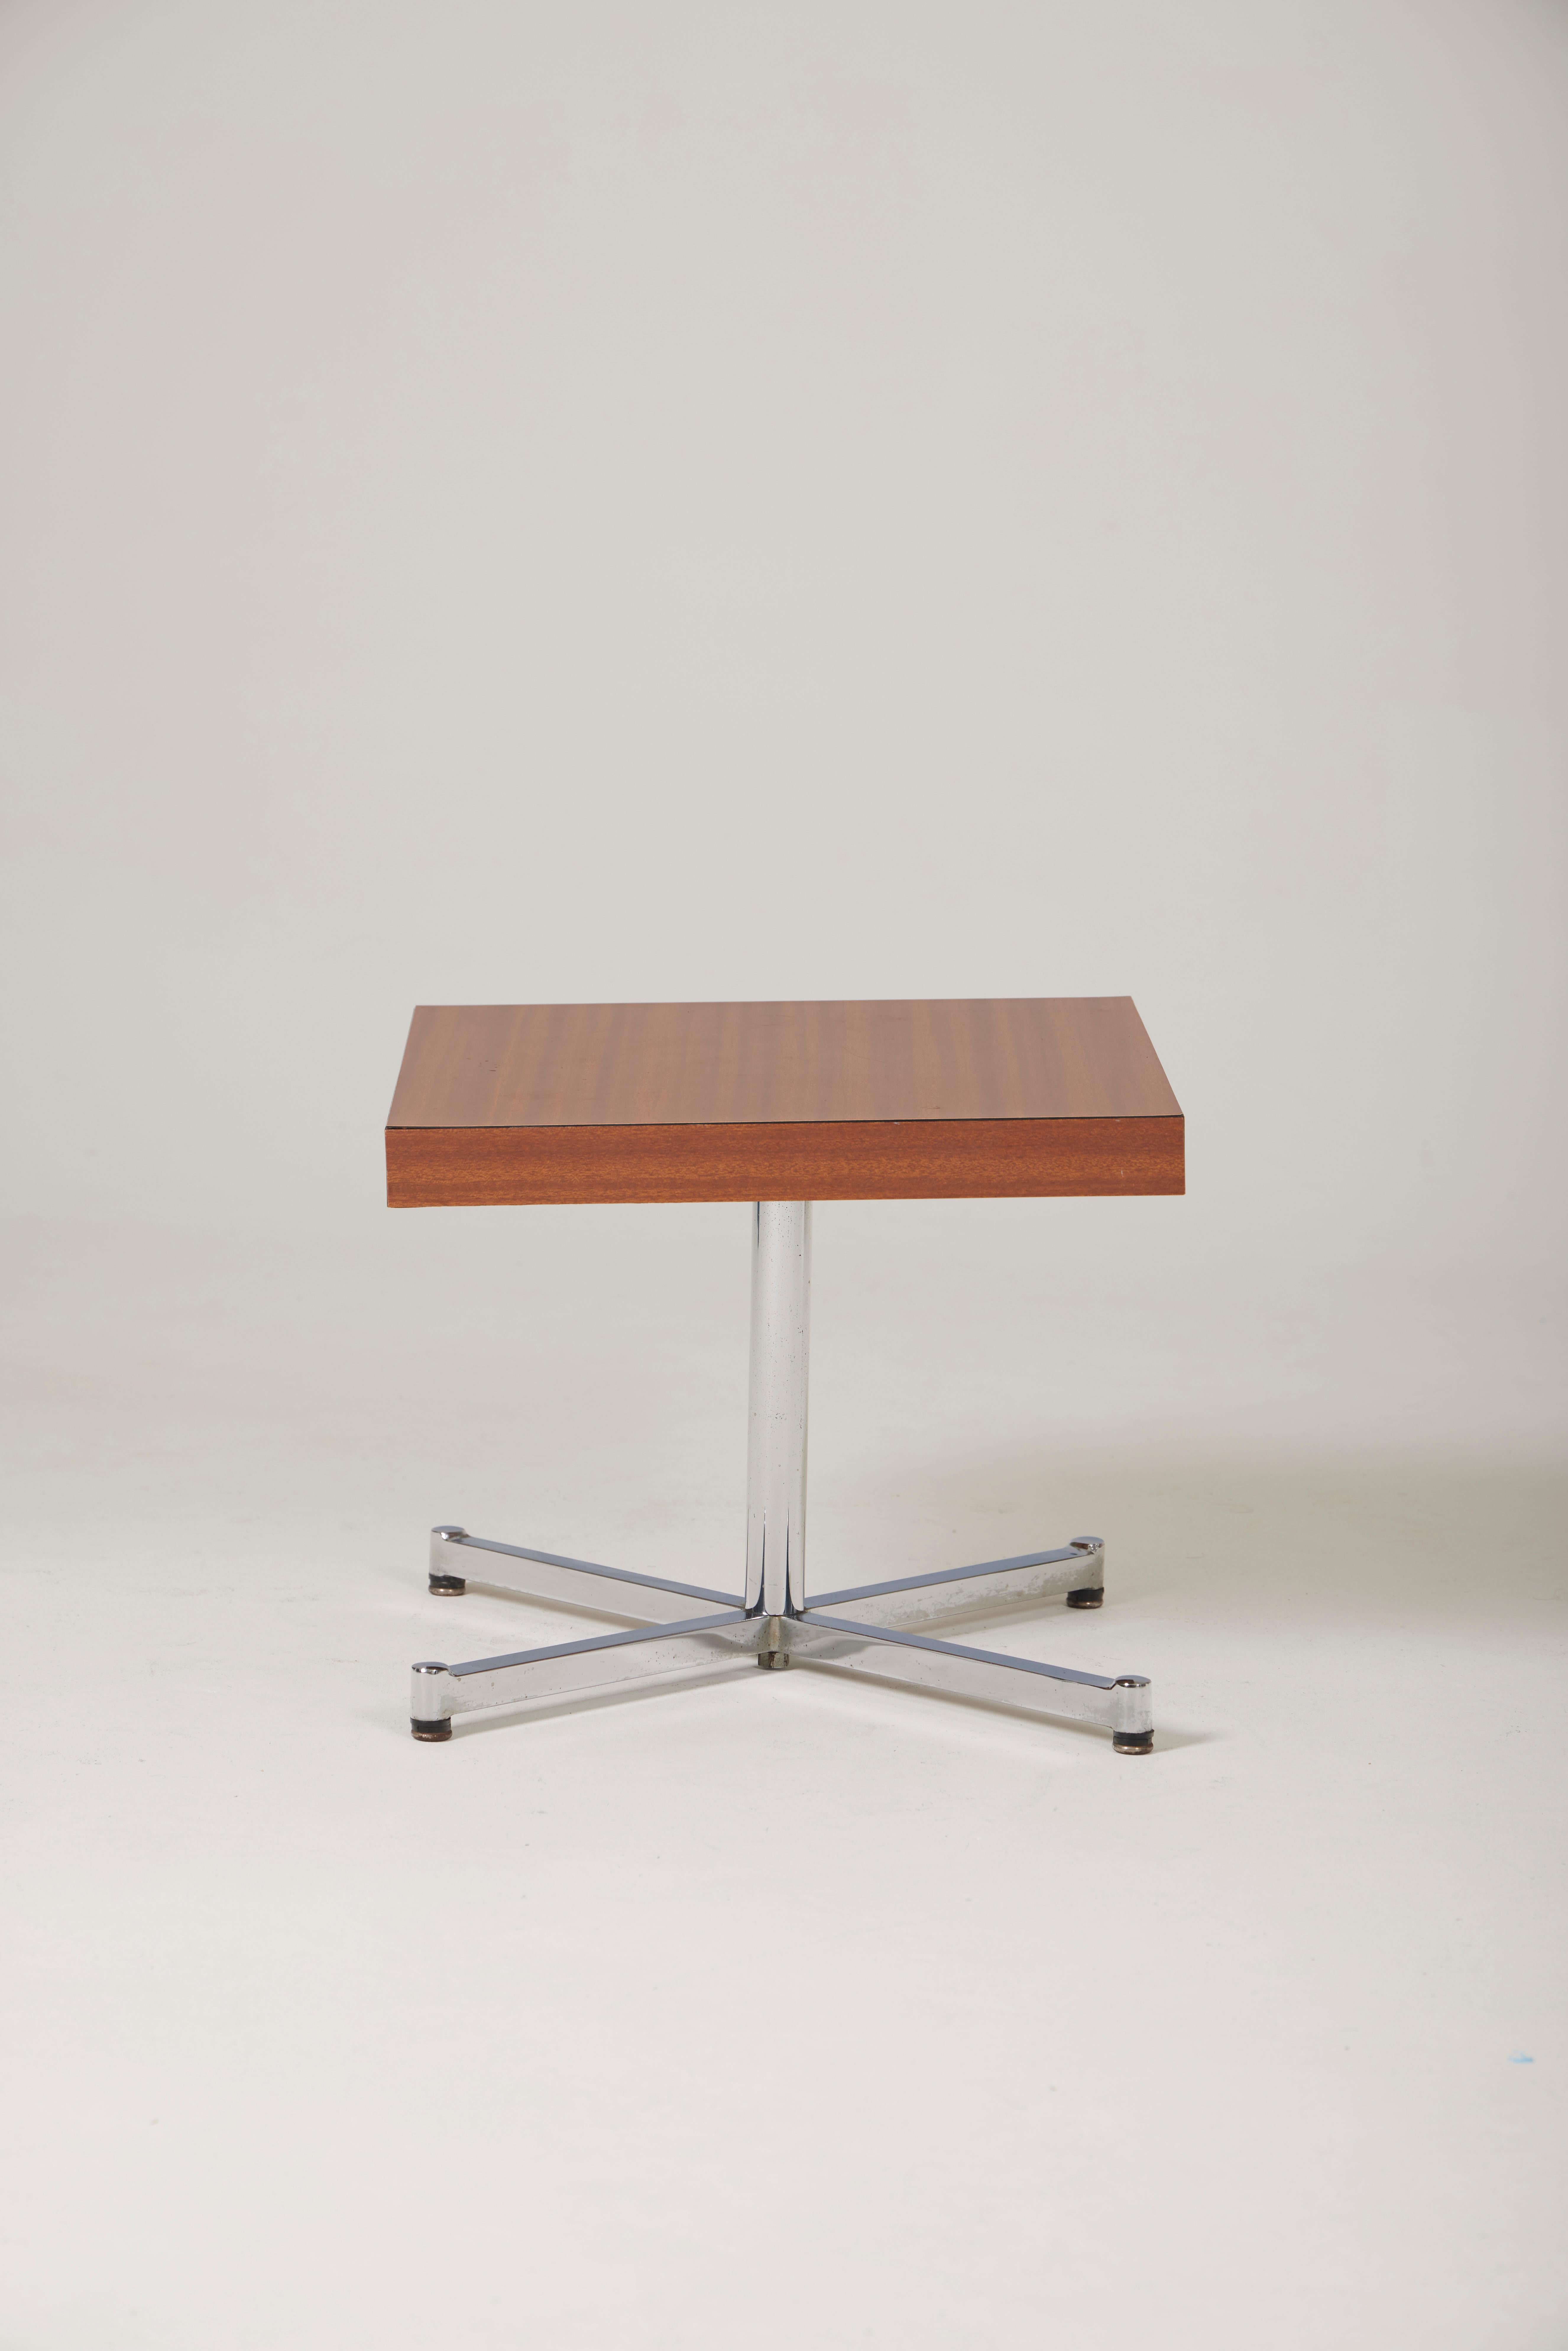 Coffee or occasional table by designer Pierre Guariche (1926-1995), 1970s. Square wooden top on a brushed metal base. Very good condition. 2 tables available.
LP1755-1756